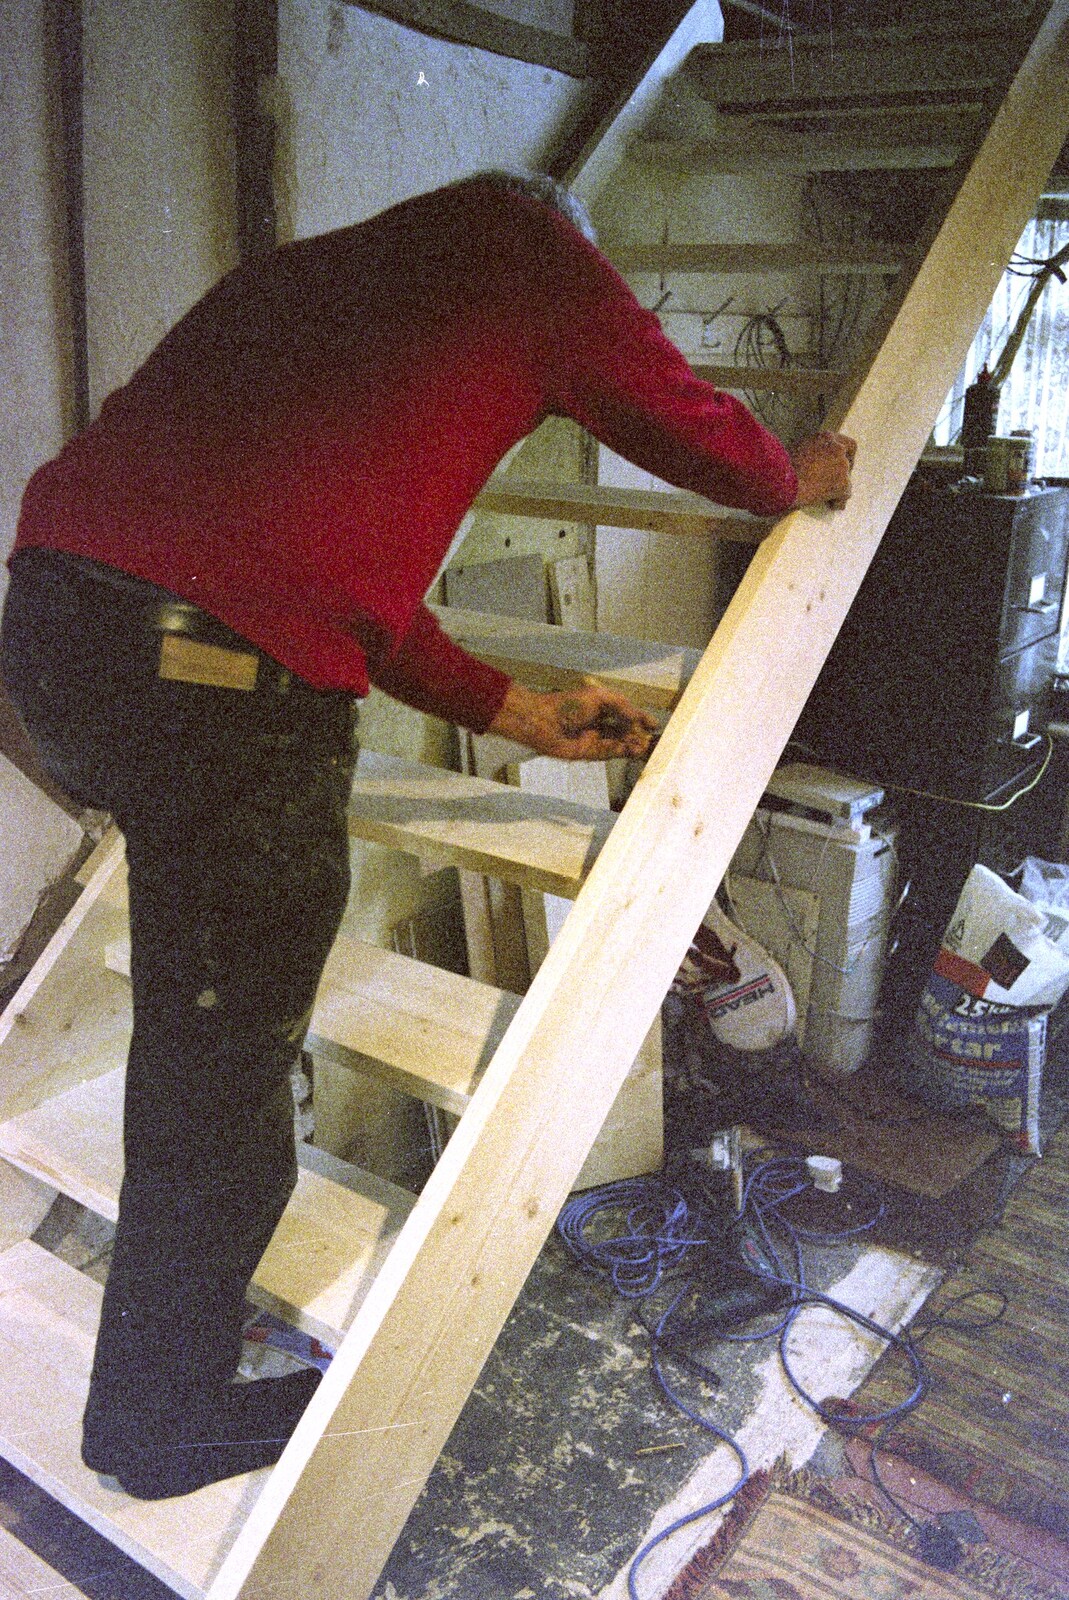 An adjustment is made from 3G Lab, and Building a Staircase, Brome, Suffolk - 11th February 2001